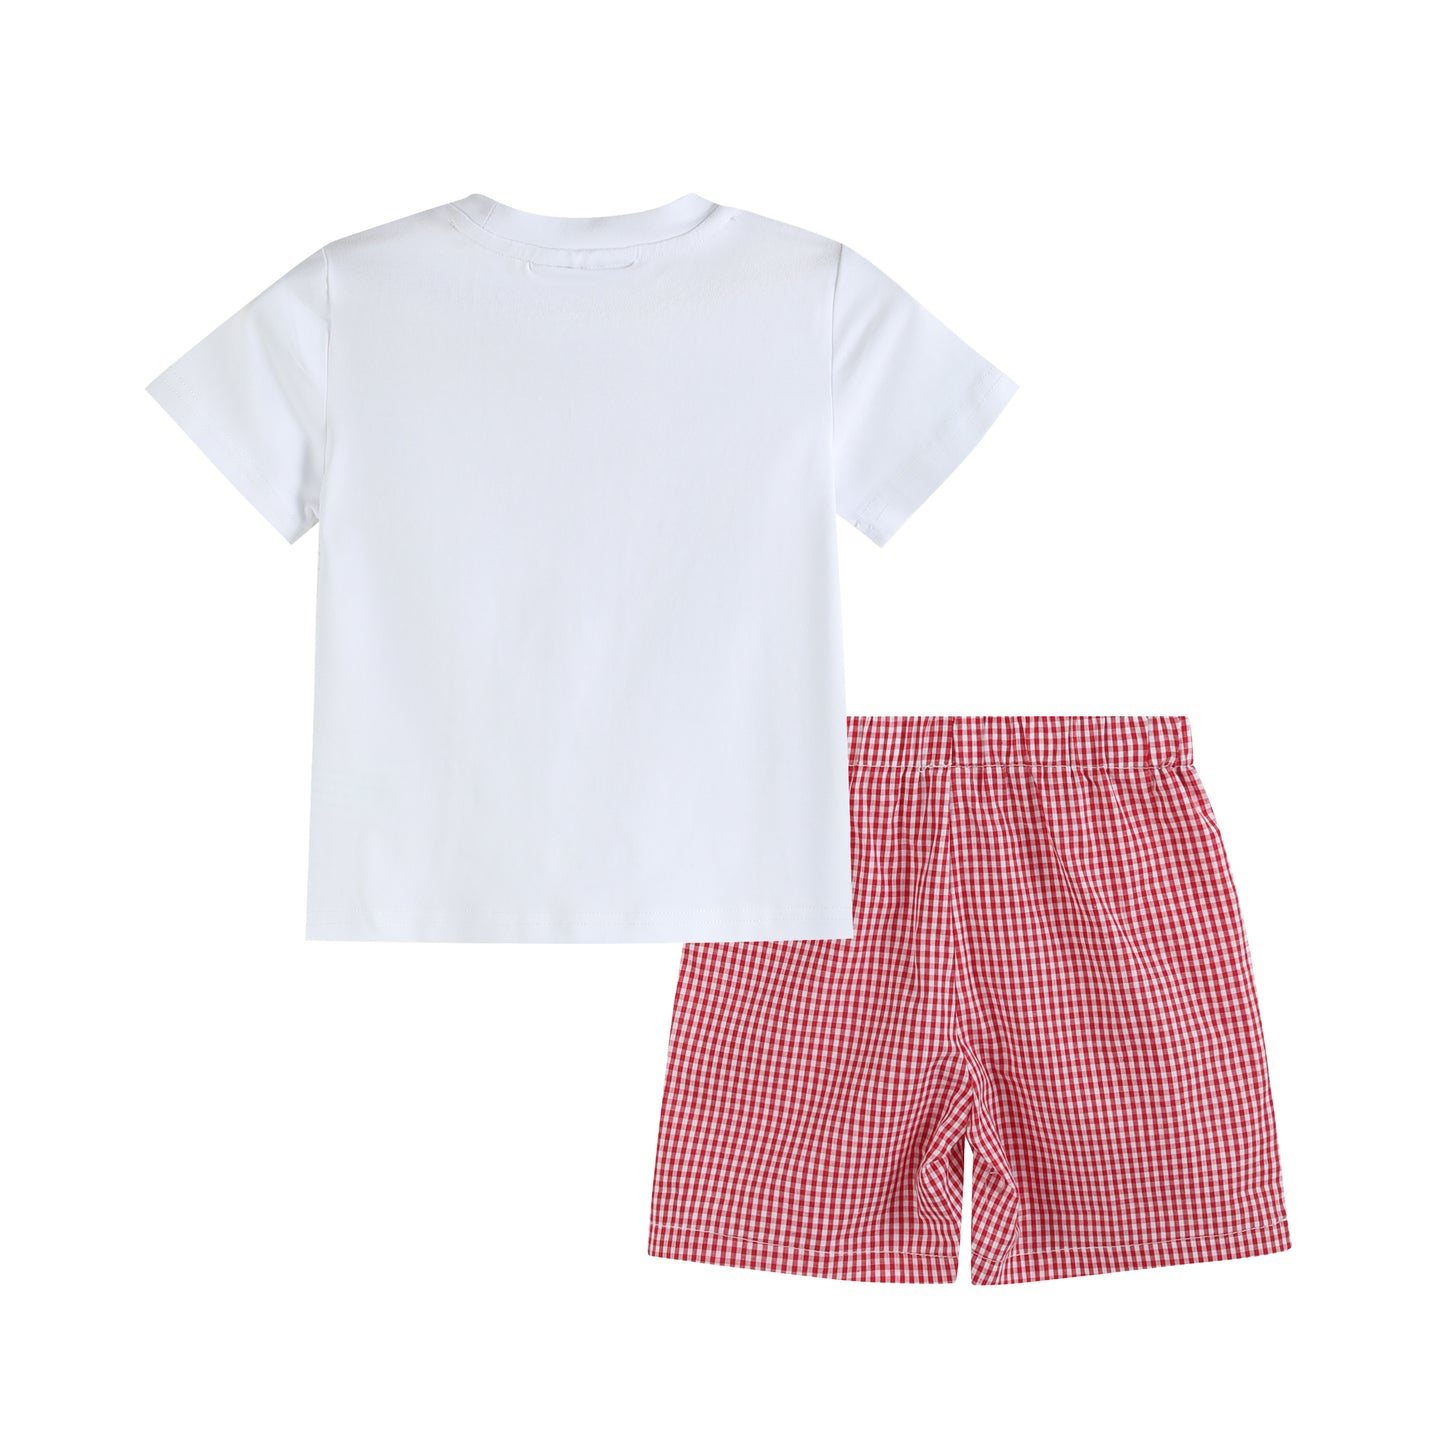 White 'ABC' Embroidered Apple Smocked Crewneck Tee & Red Gingham Shorts